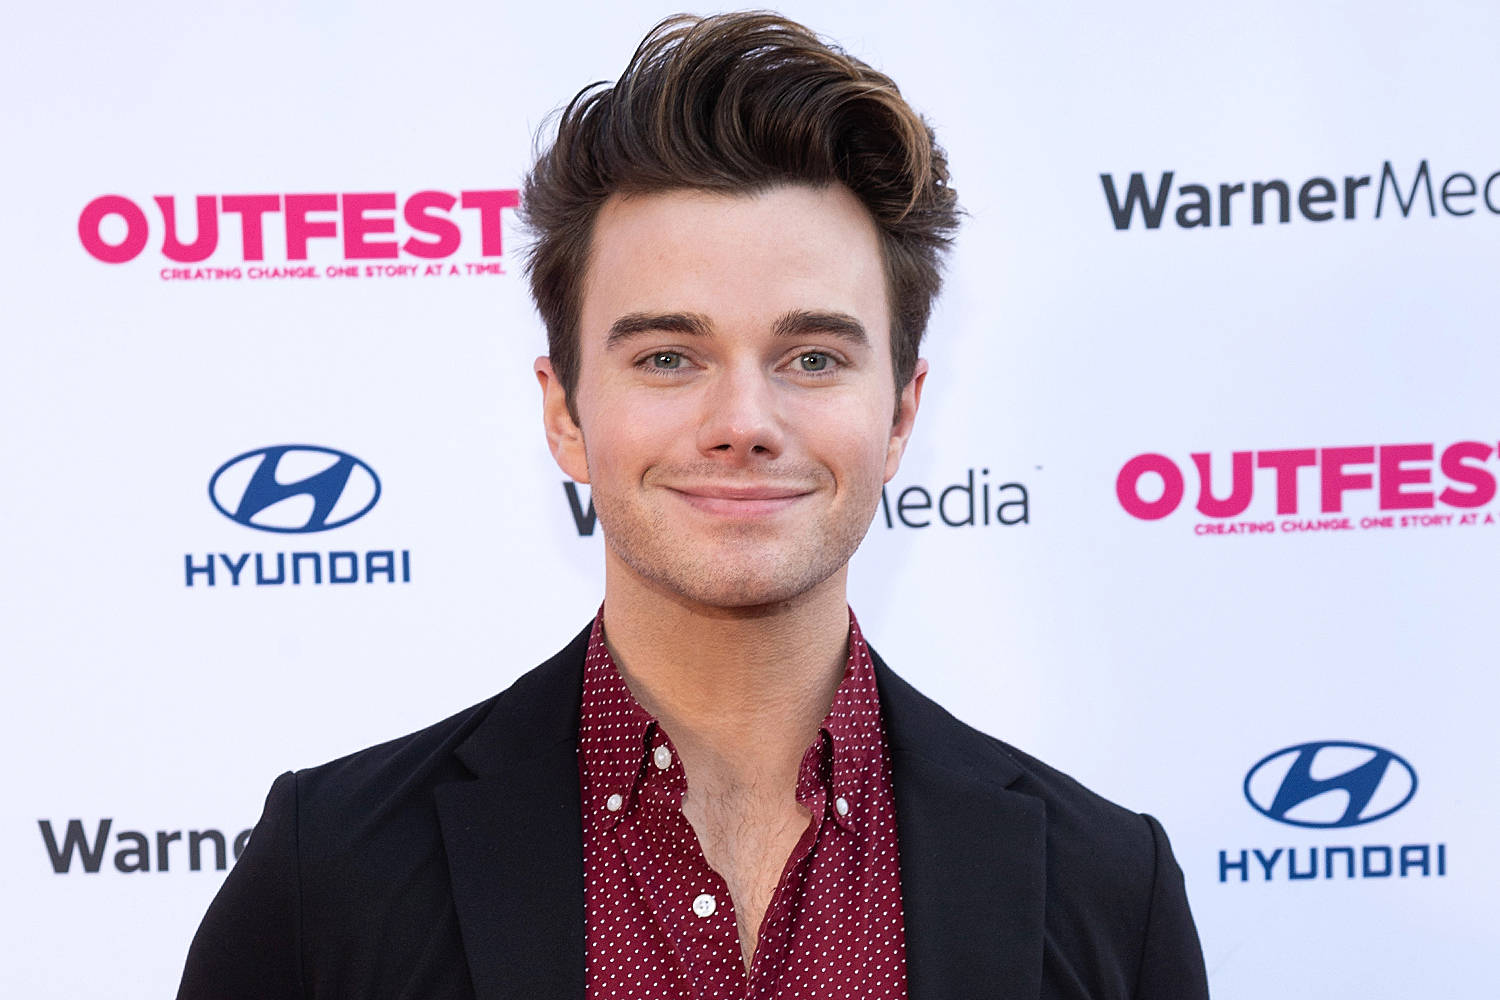 Chris Colfer In Outfest Lgbtq Film Wallpaper